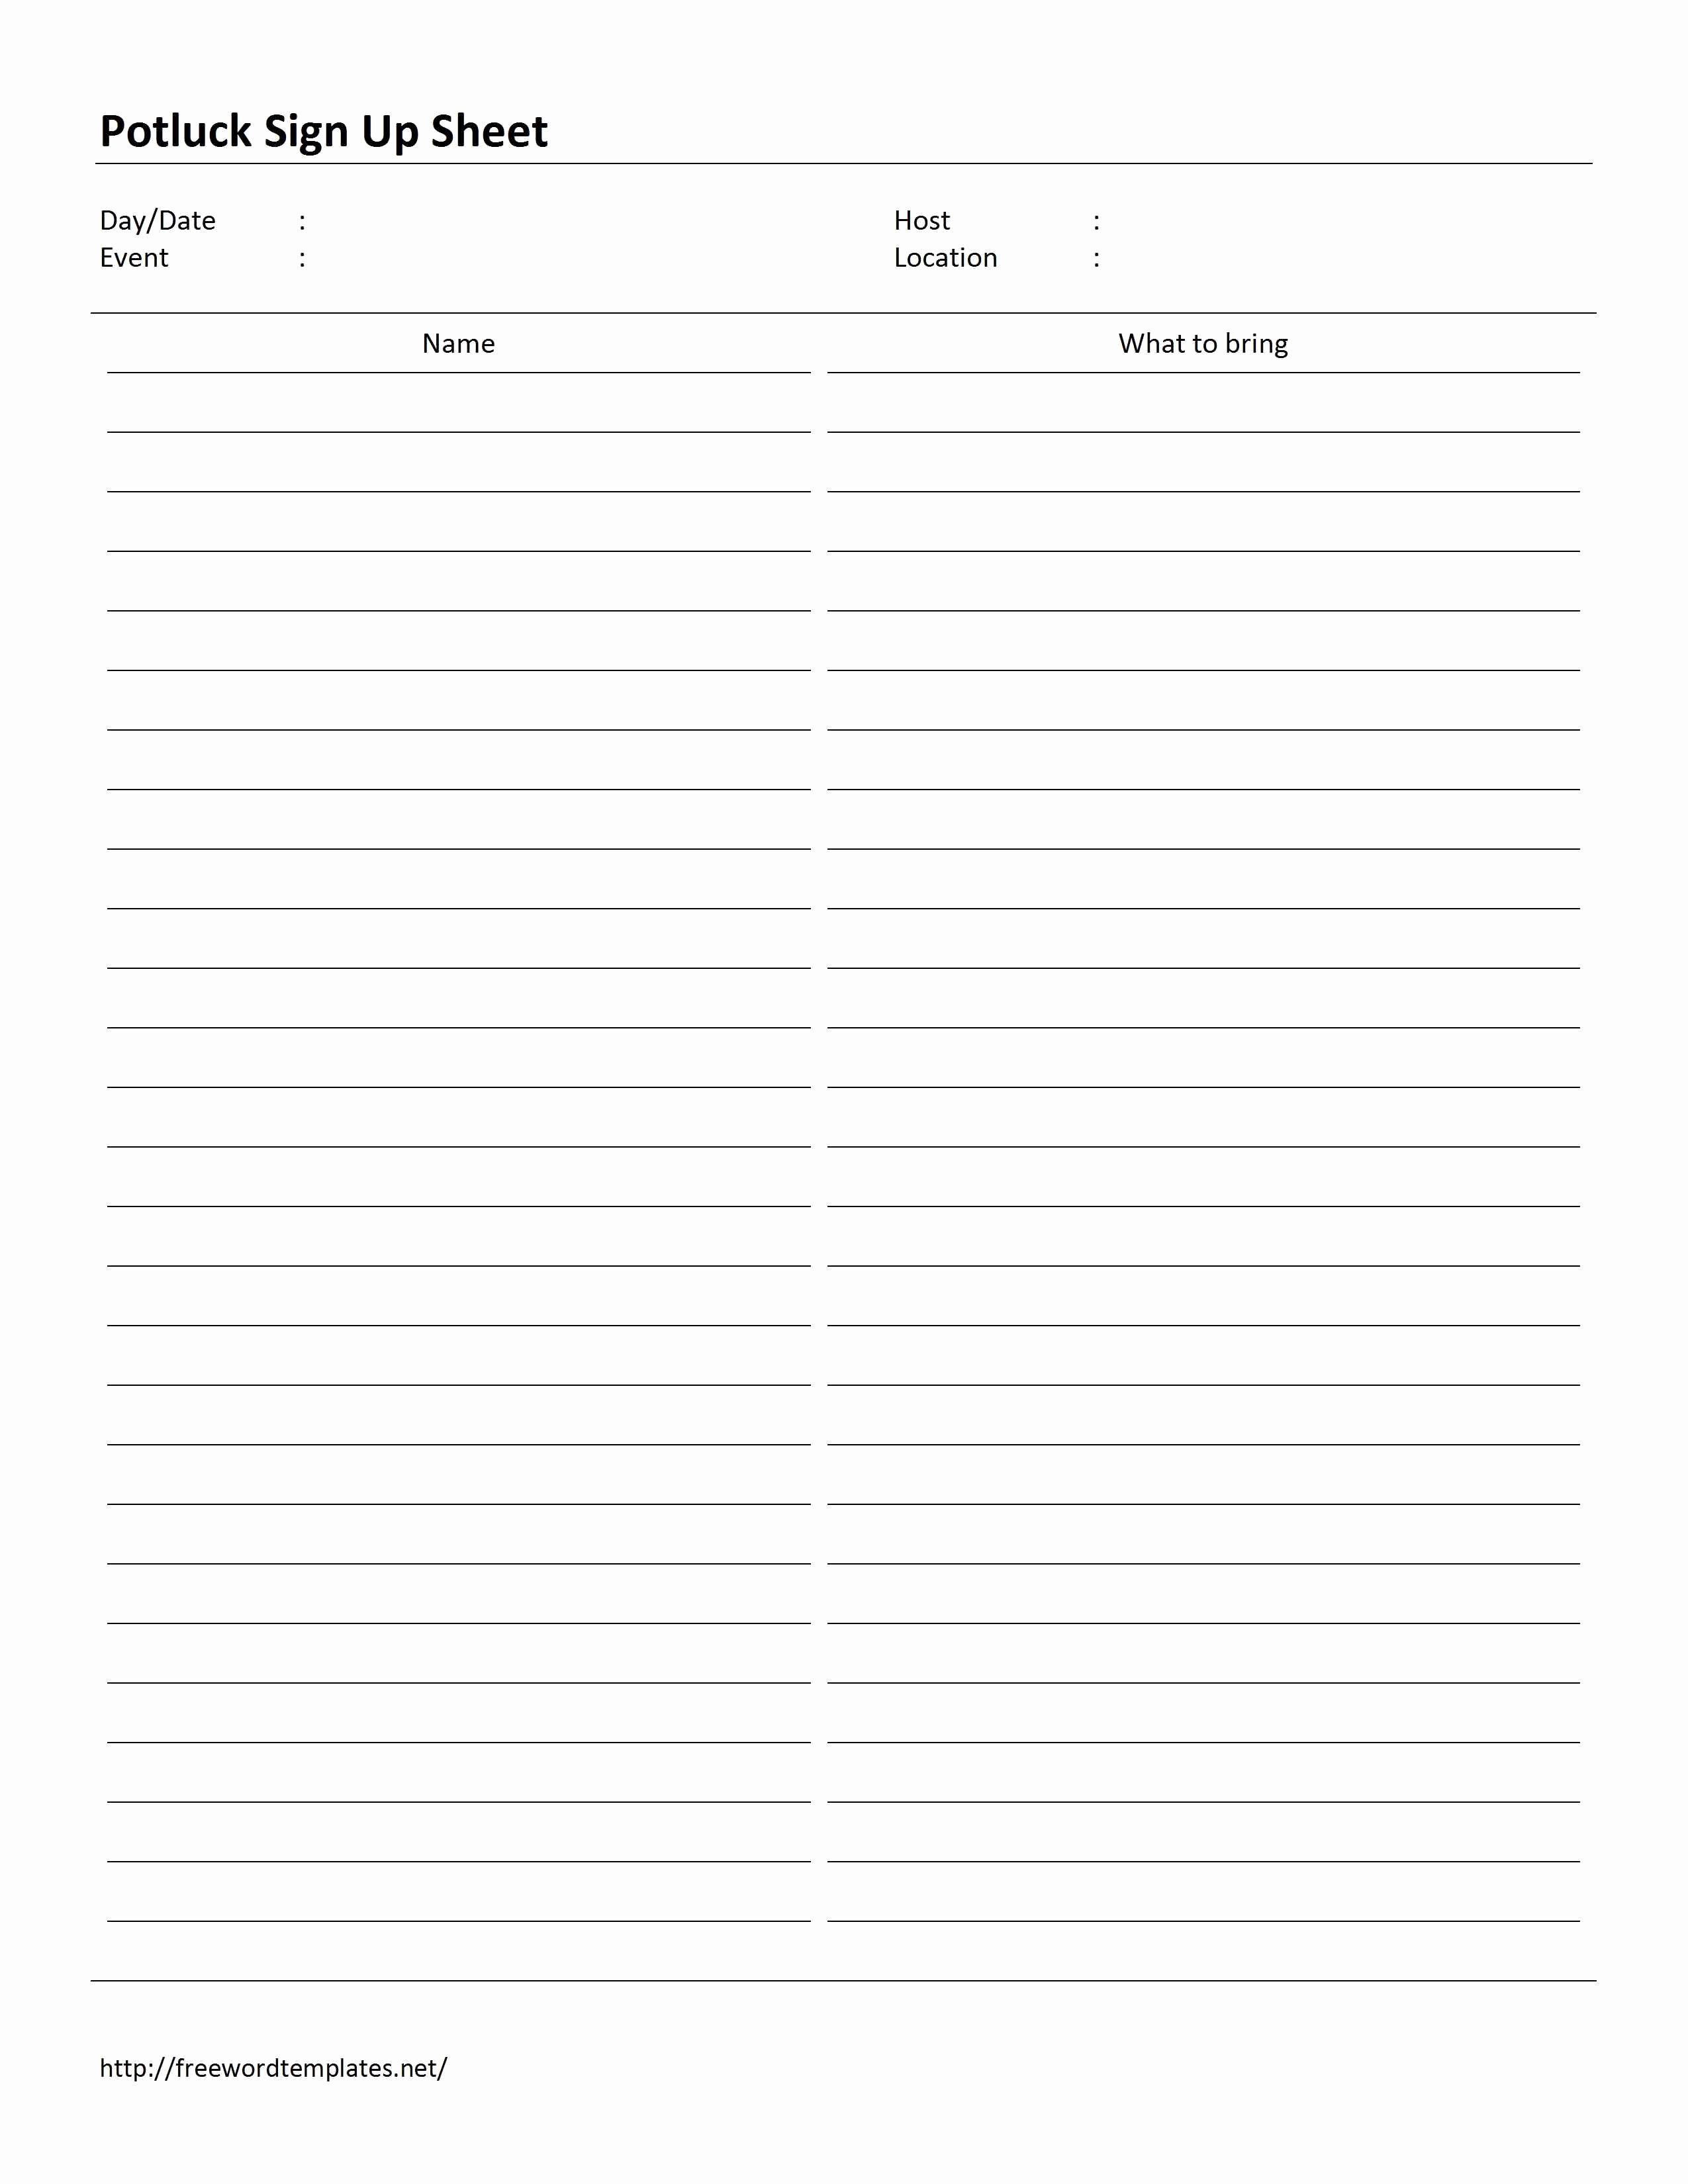 Sign Up form Template Word Unique Potluck Sign Up Sheet Template